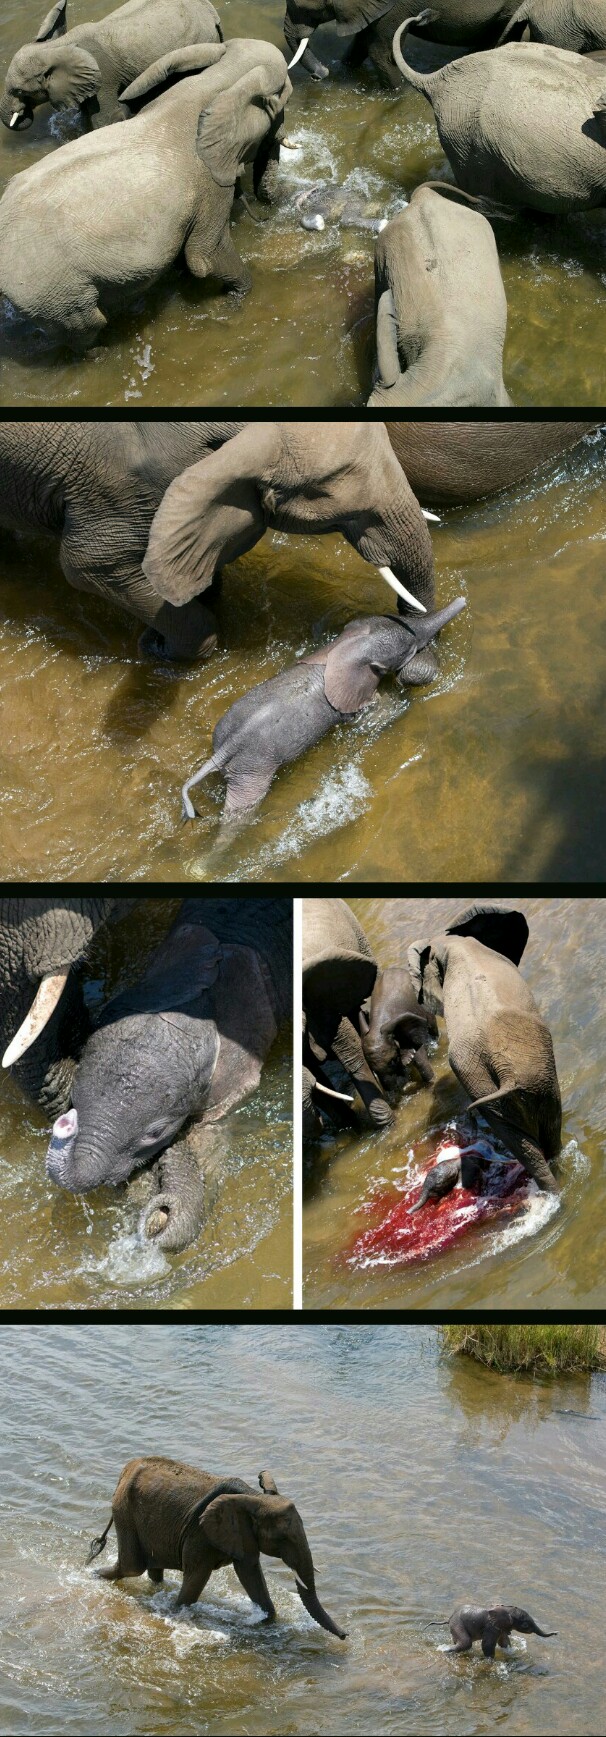 Elephant giving birth in water and the herd protects it all from the alligators